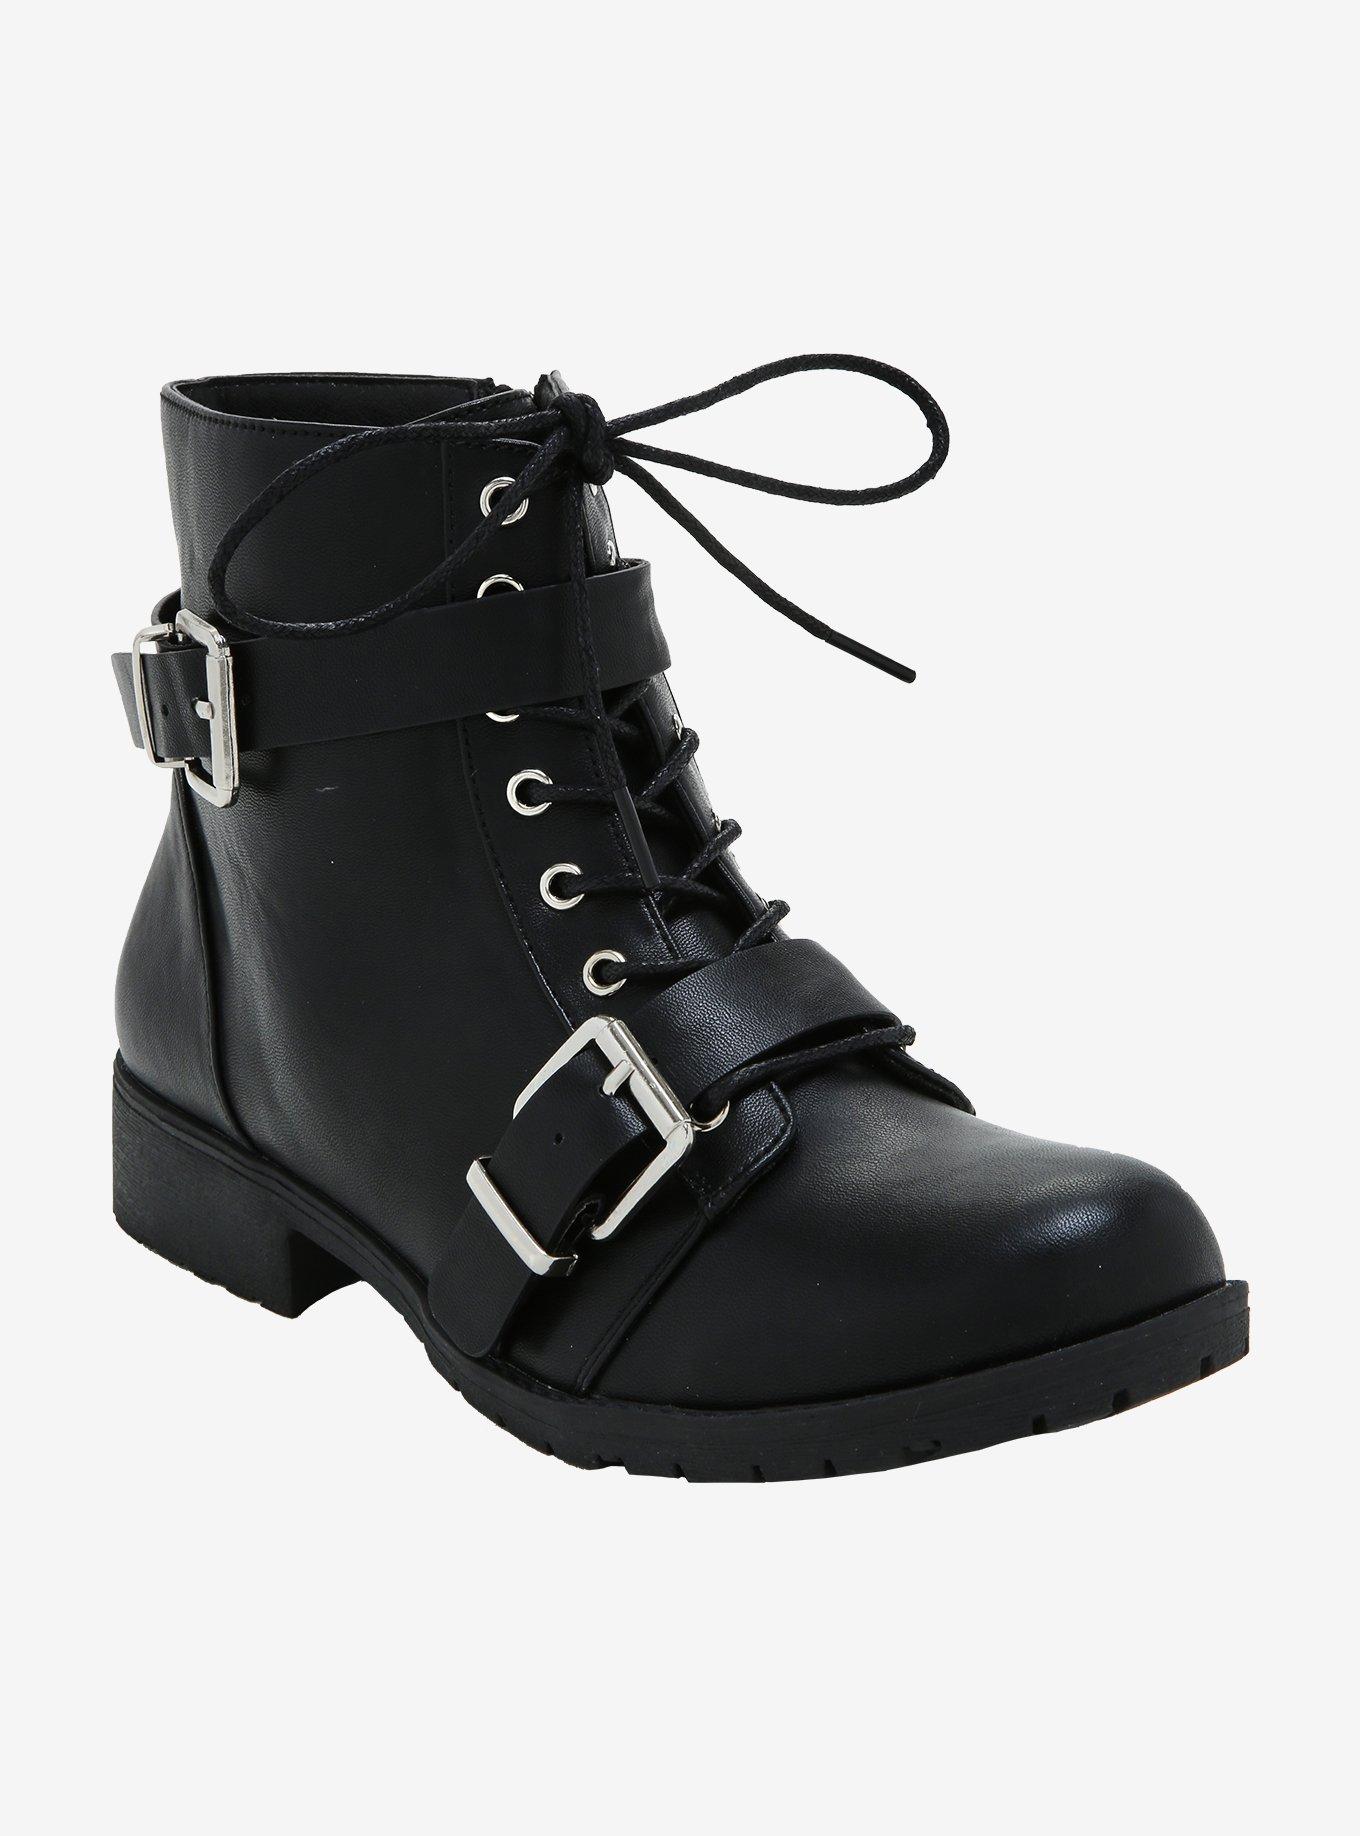 Mad House Buckle Boots | Hot Topic